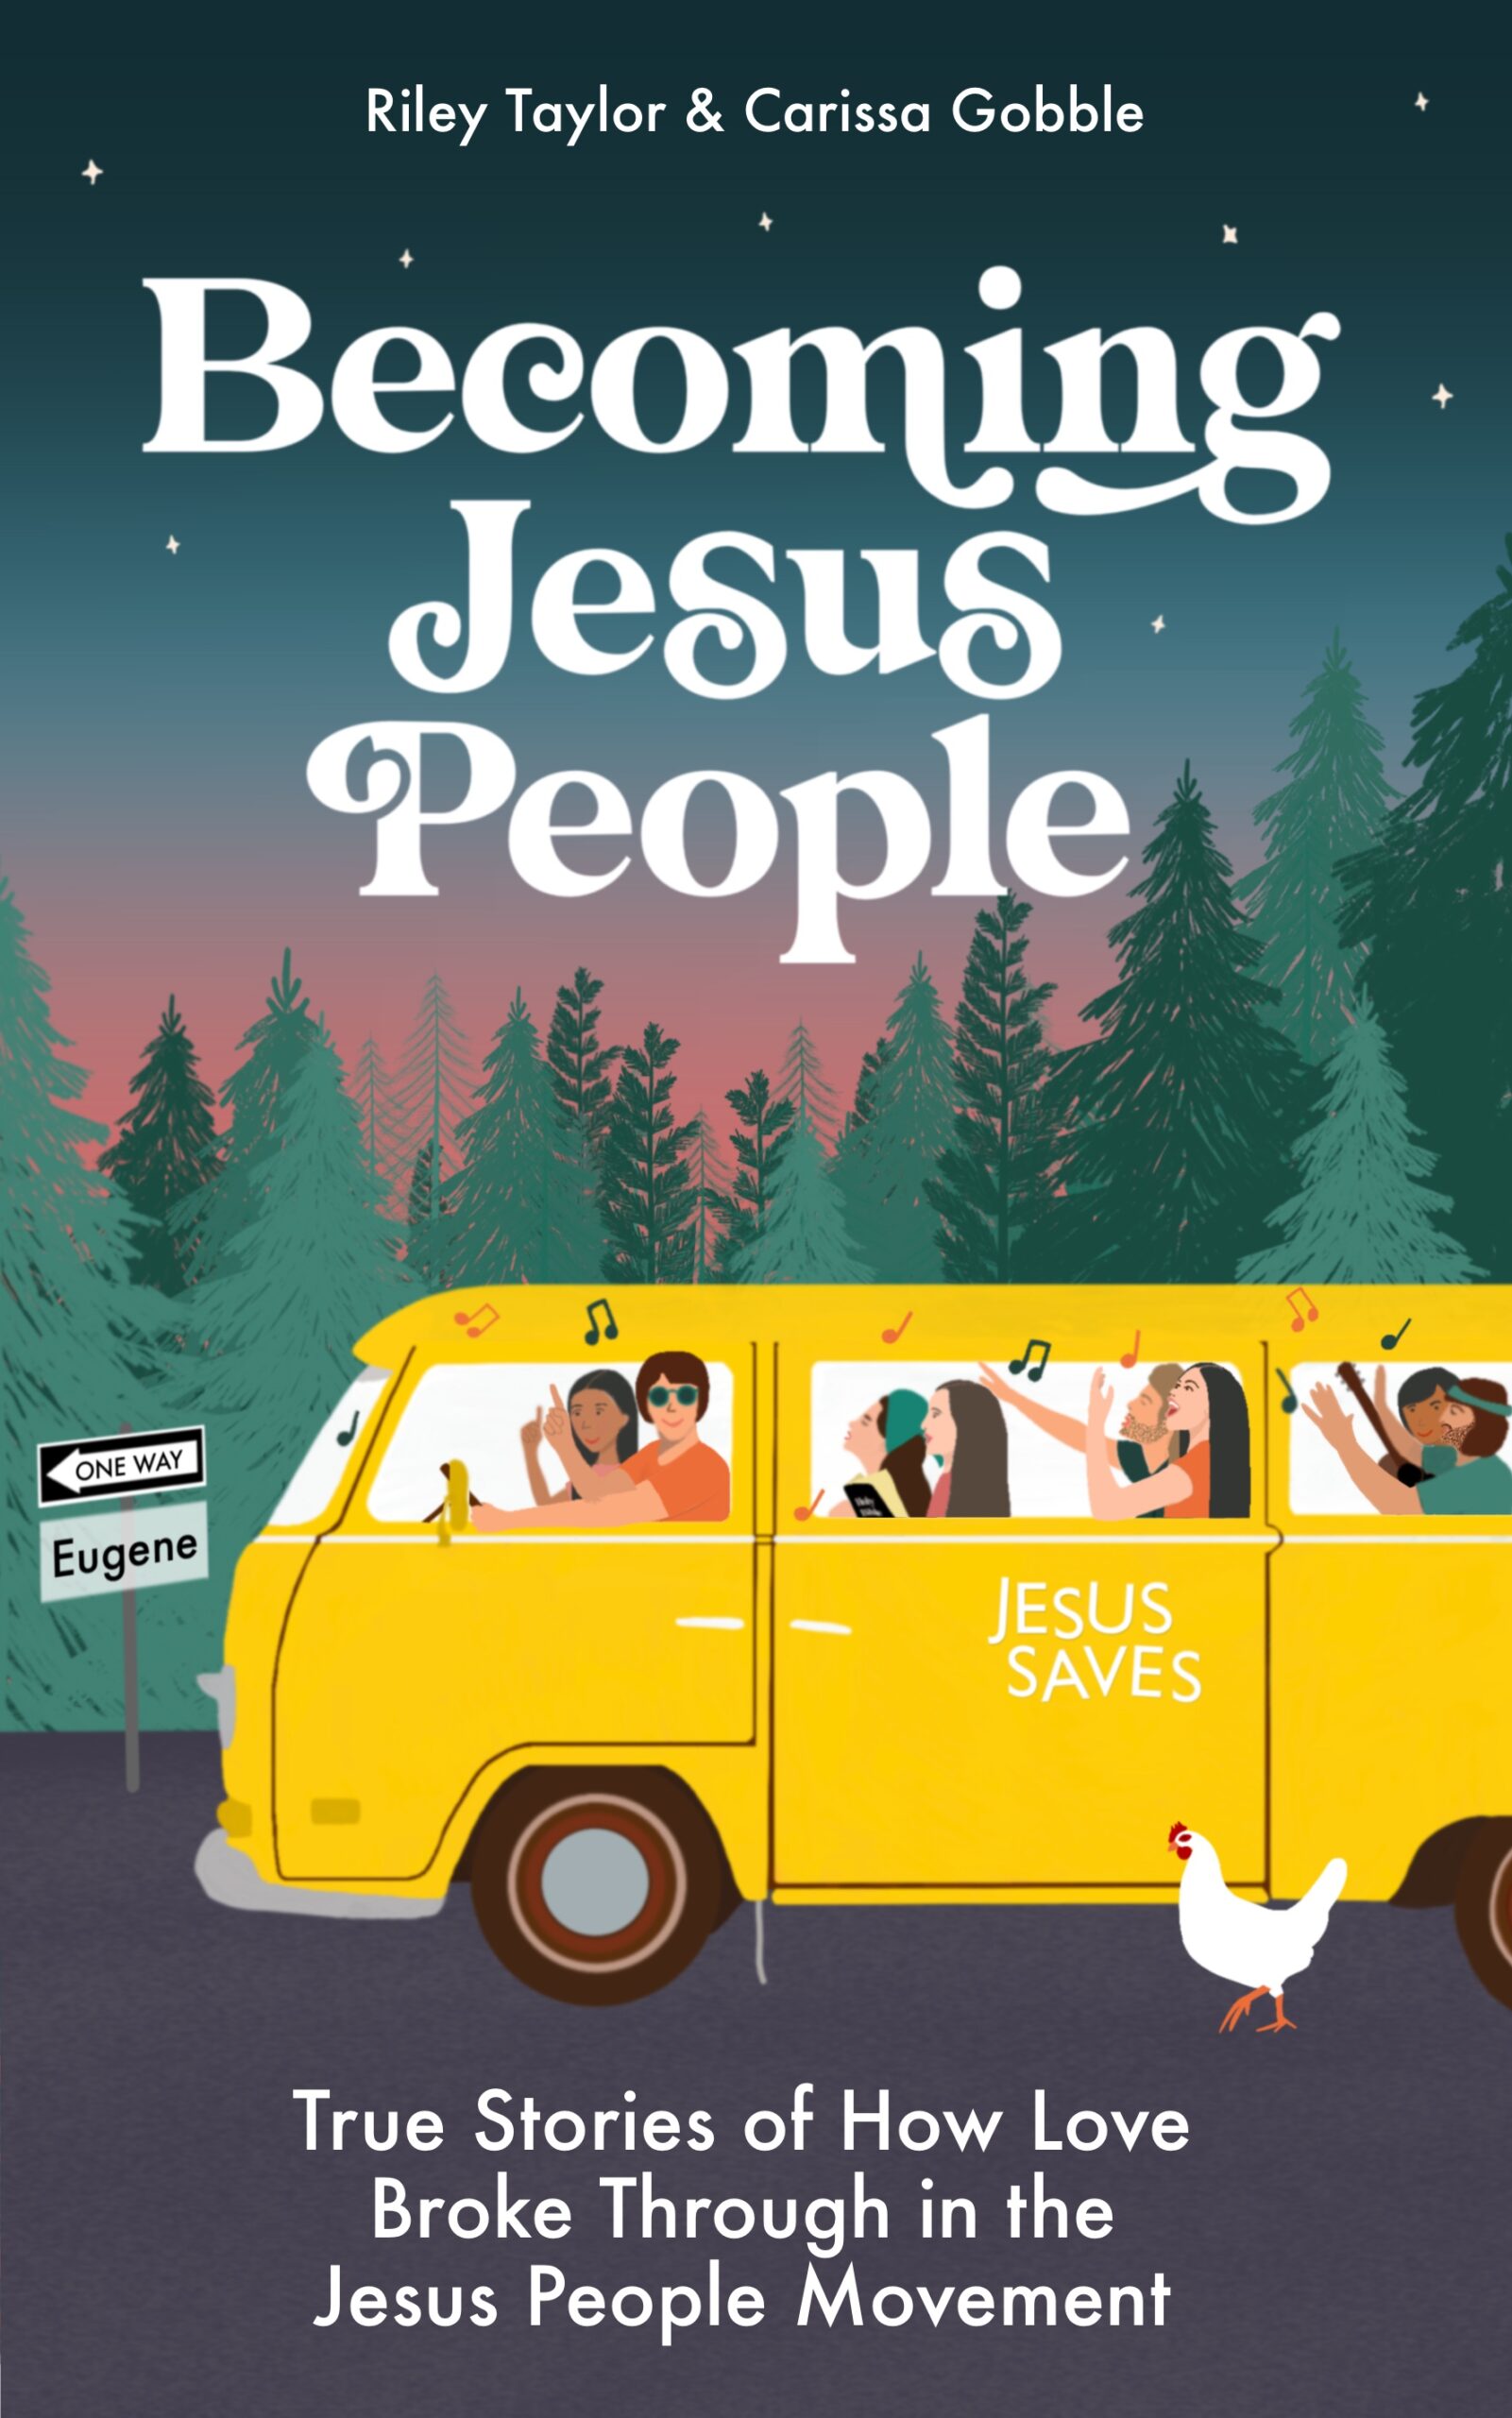 FREE: Becoming Jesus People: True Stories of How Love Broke Through in the Jesus People Movement by Riley Taylor & Carissa Gobble